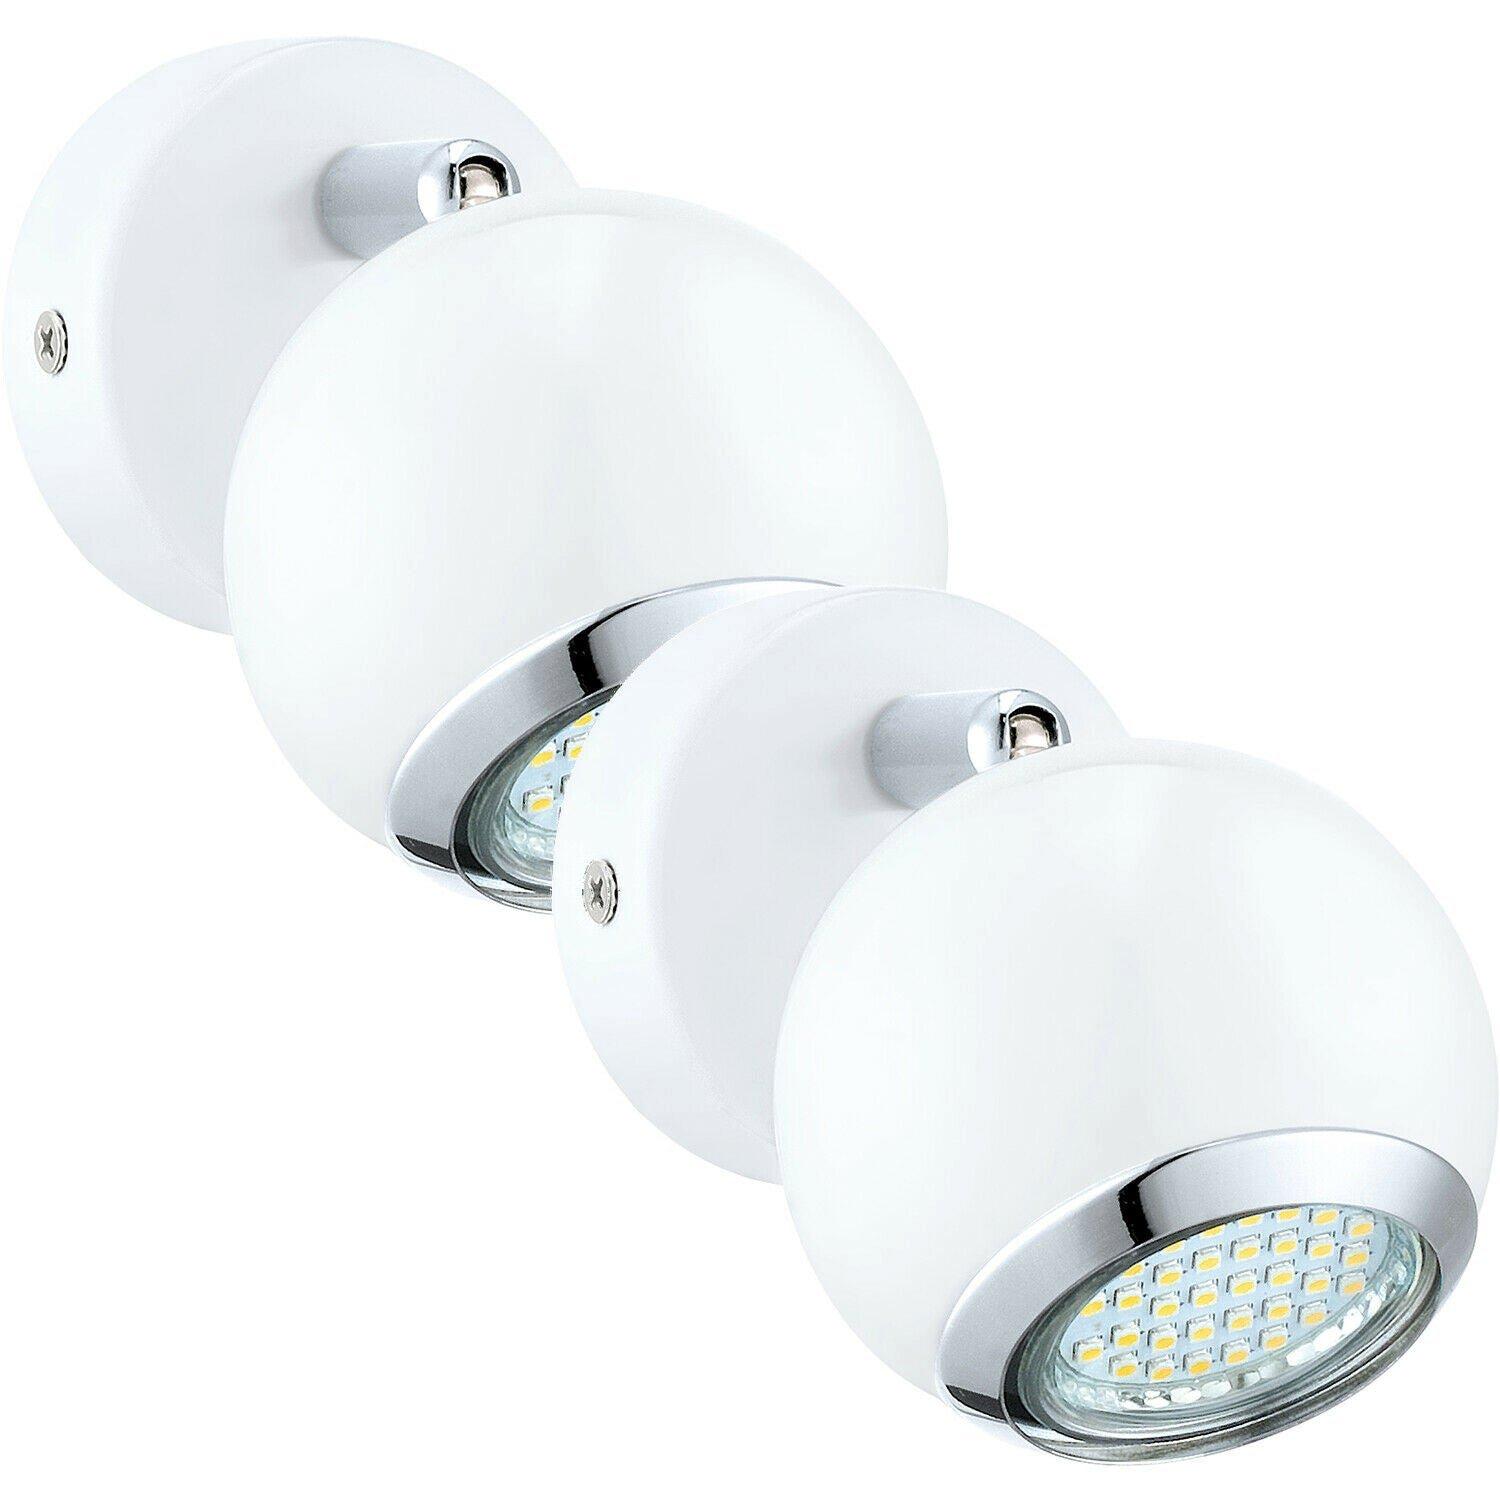 2 PACK Wall Spot Light Round ous Colour White Chrome Shade GU10 1x3W Included